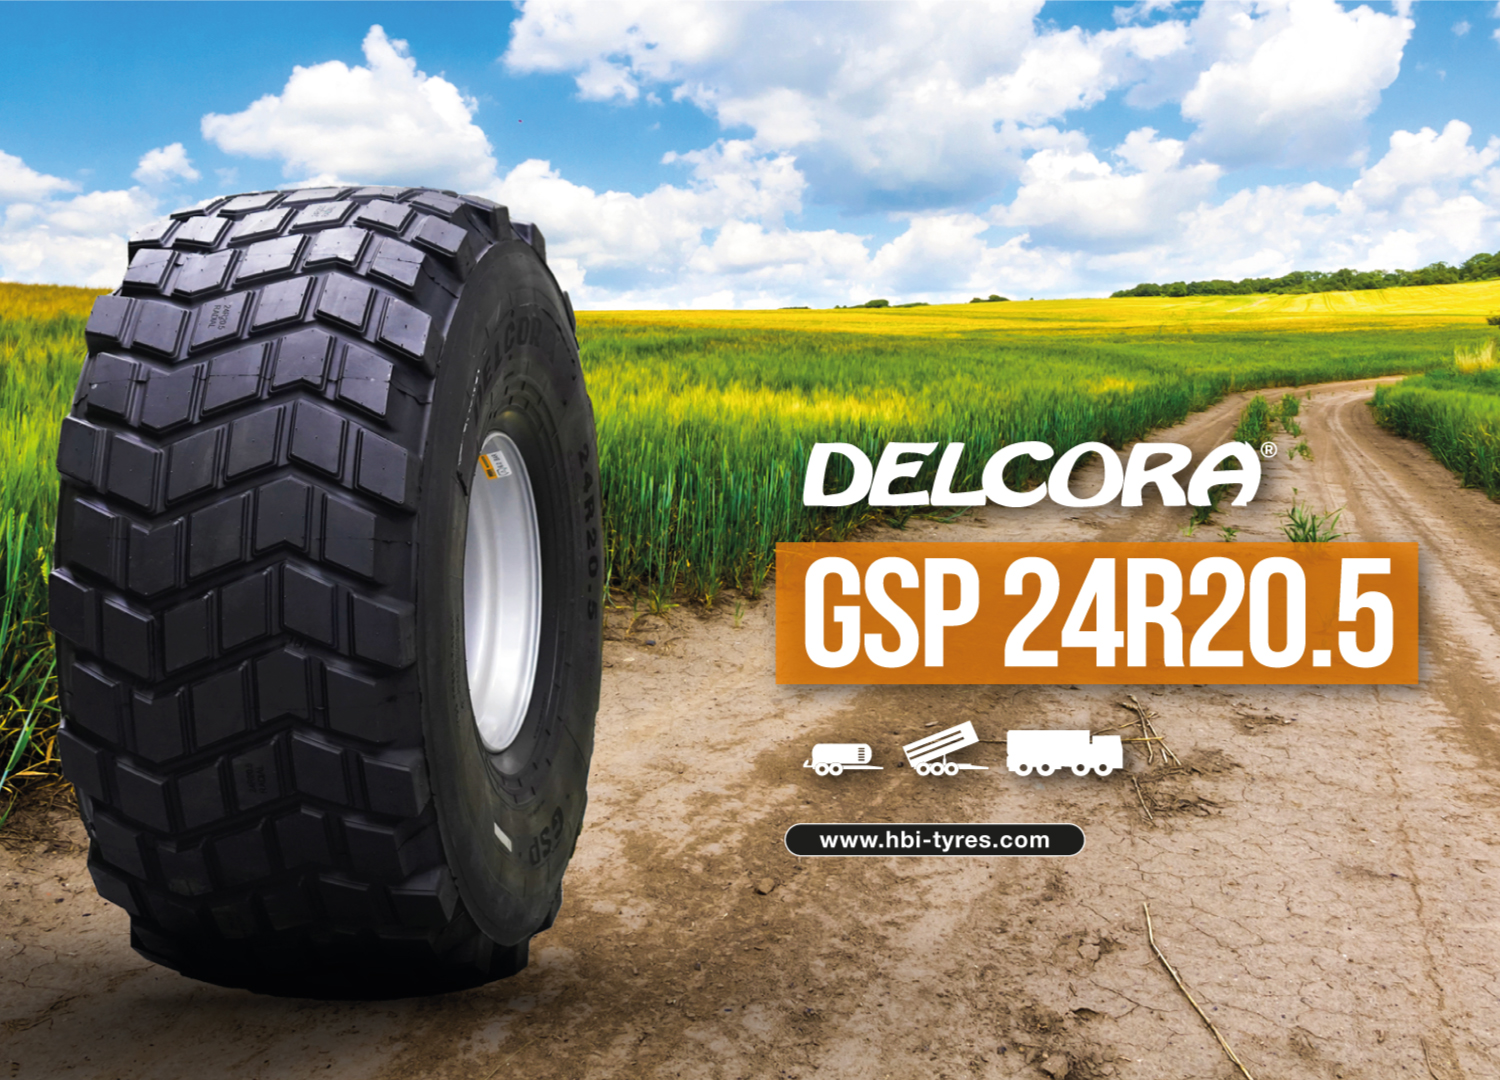 Our brand new Delcora® GSP 24R20.5 tyre!